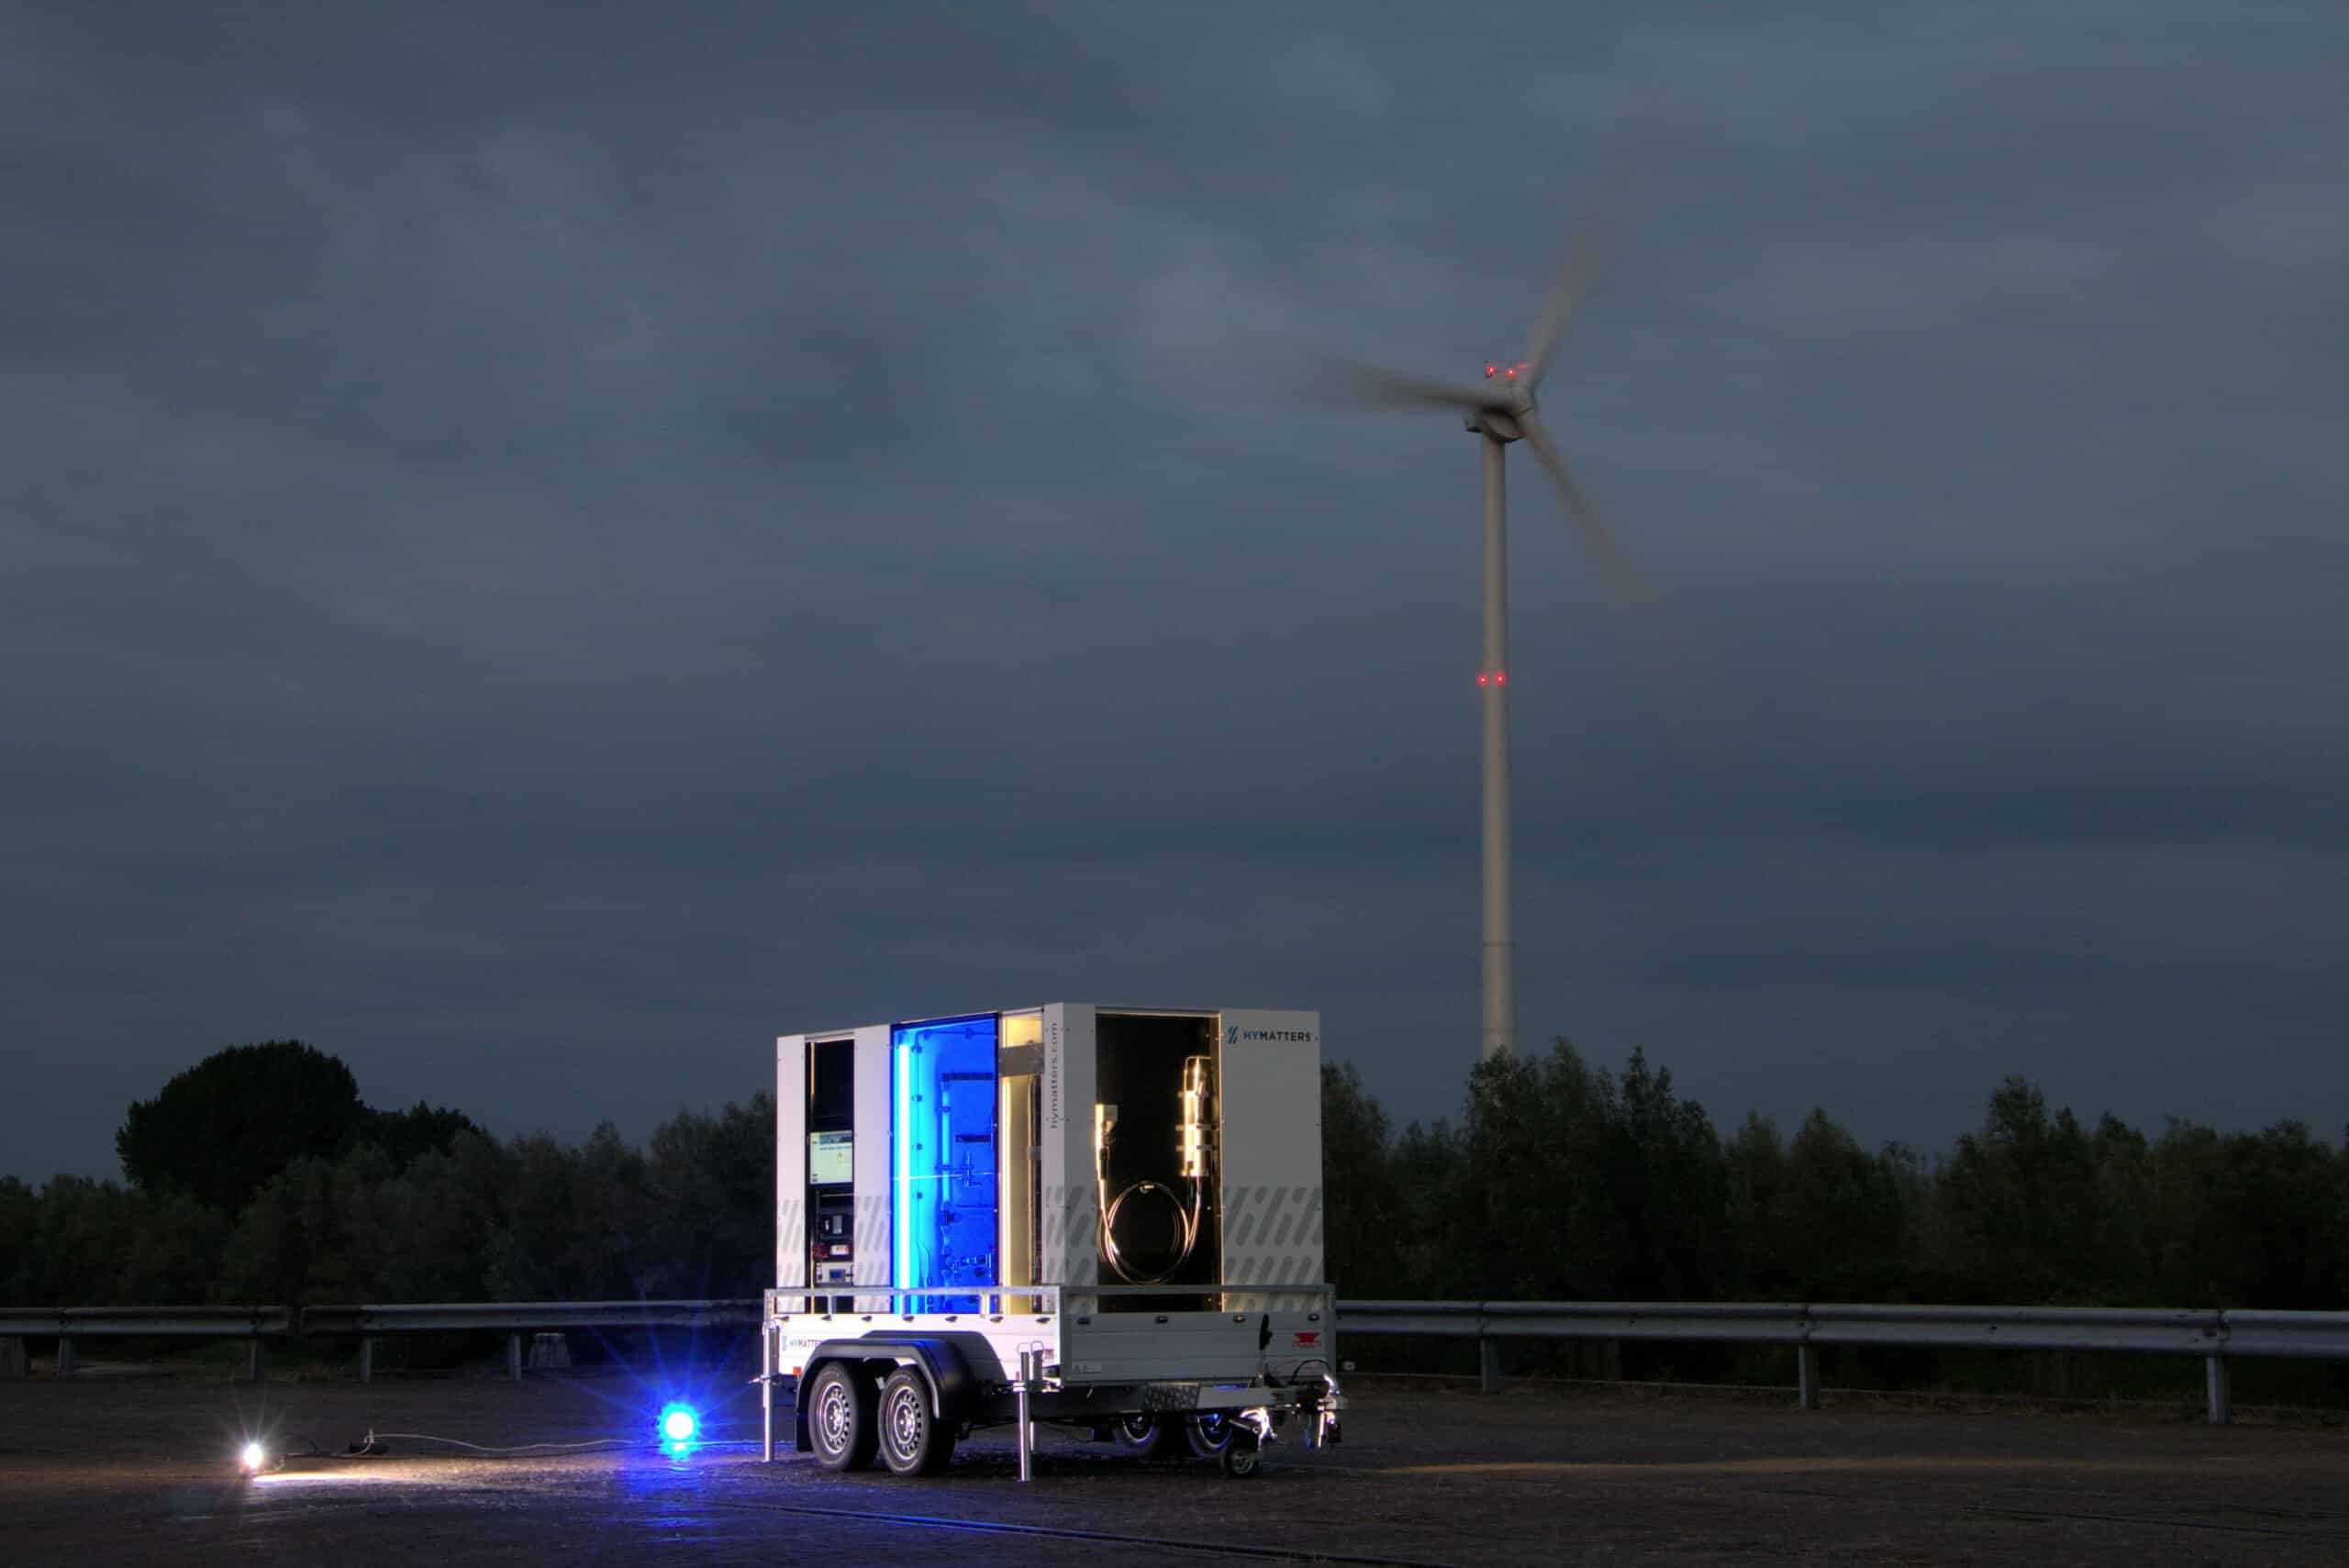 With hardware on a trailer, HyMatters supplies businesses with their own hydrogen